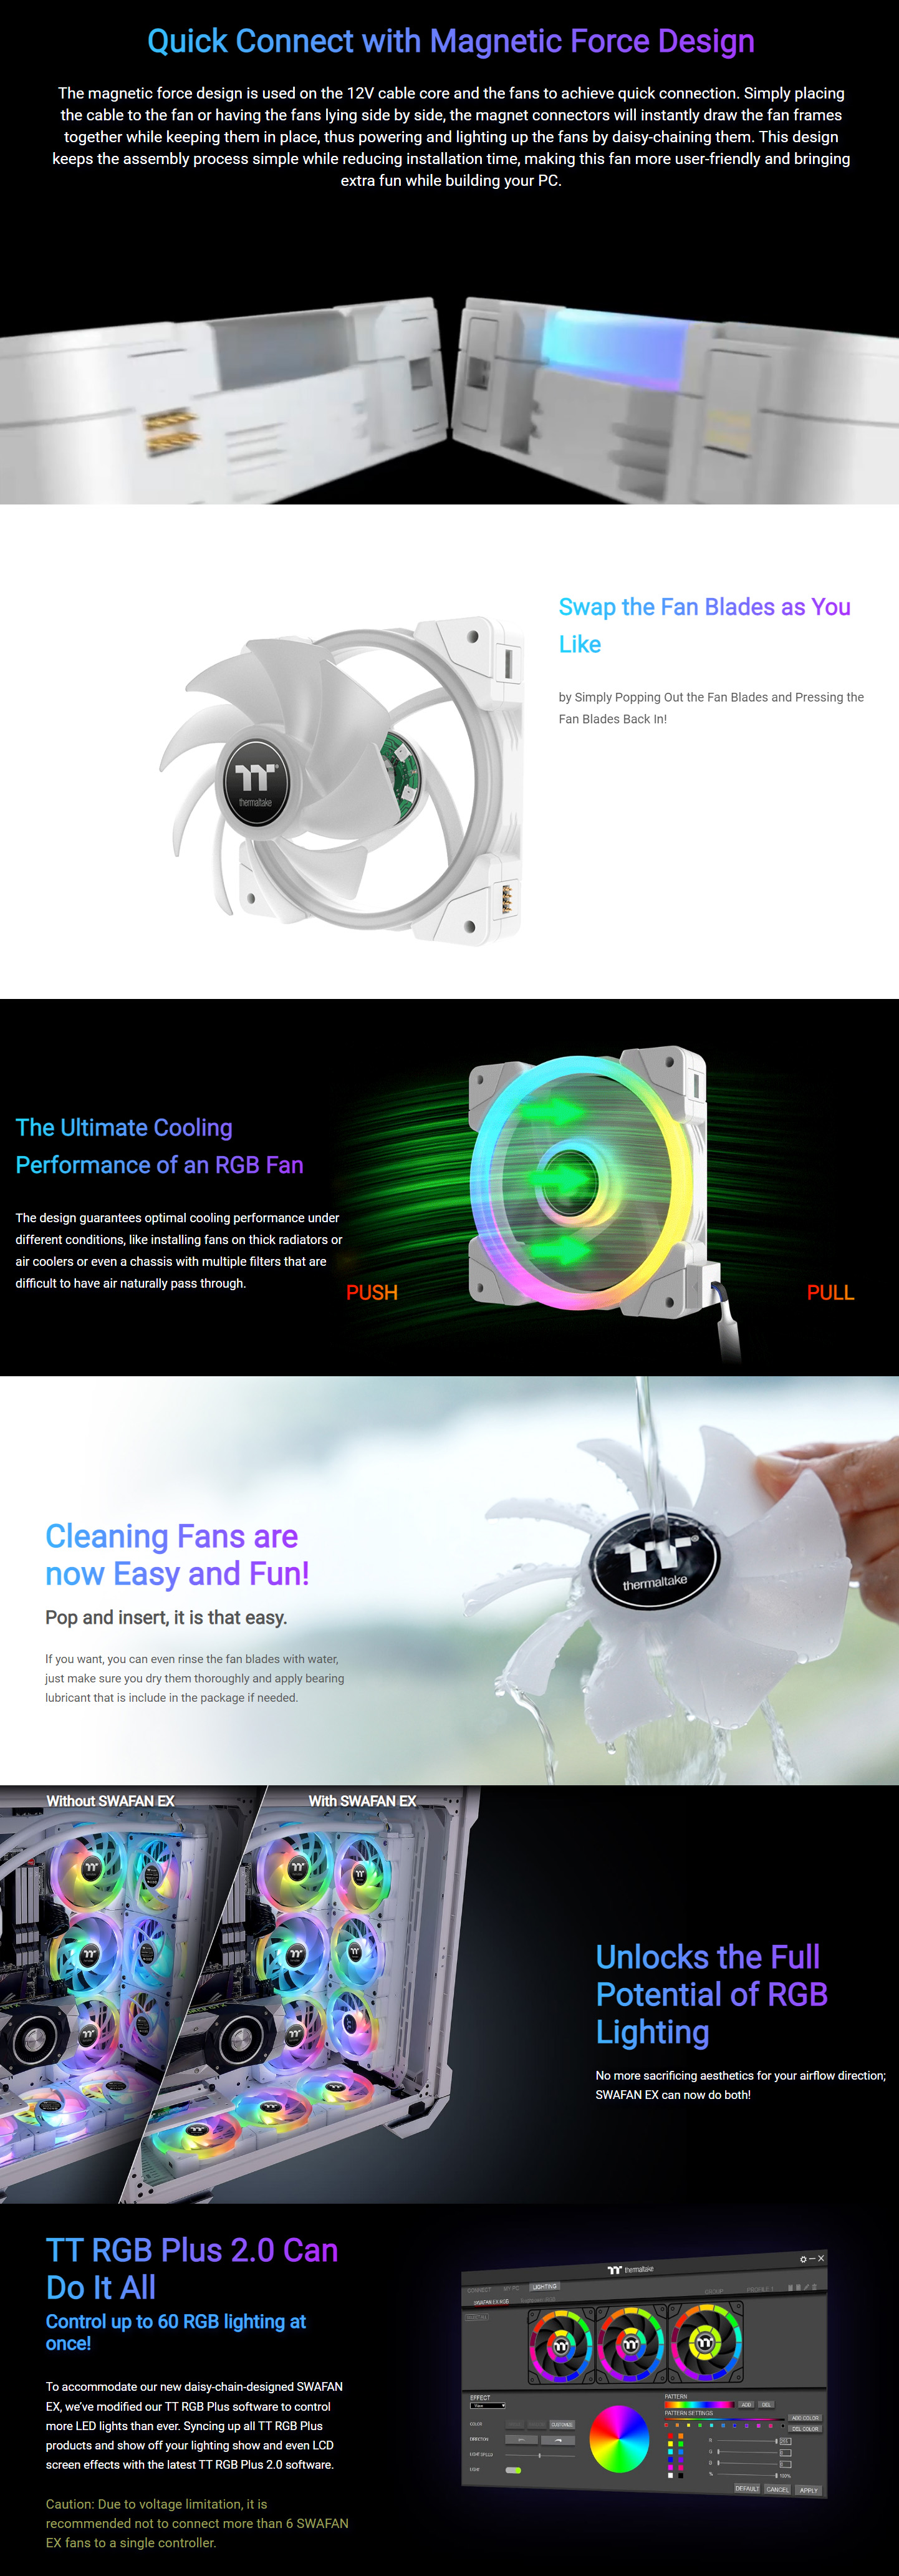 CPU-Cooling-Thermaltake-SWAFAN-EX12-120mm-RGB-PWM-Magnetic-Cooling-Fan-3-Pack-White-1